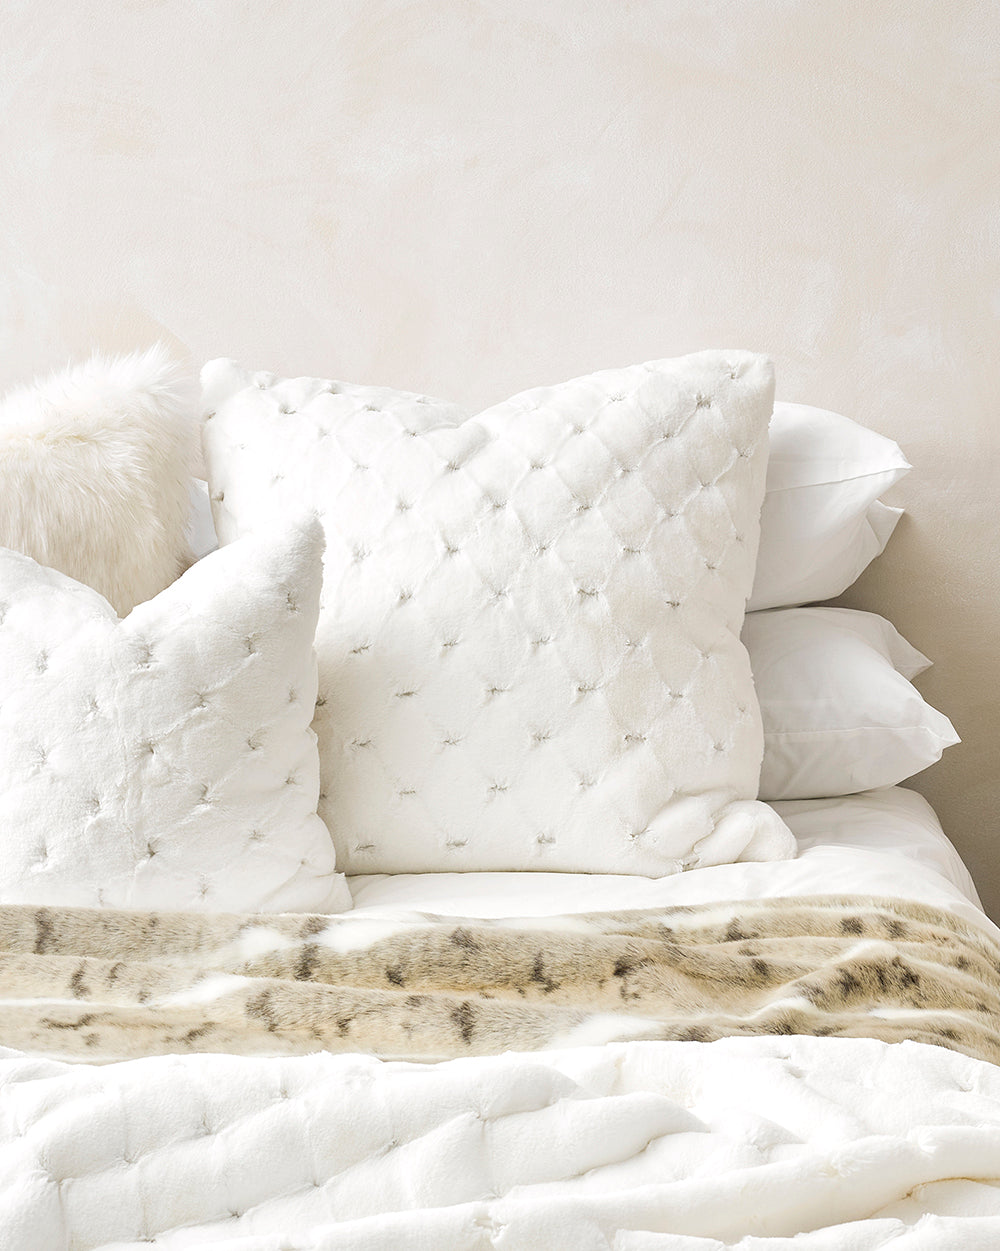 Heirloom Valentina White Cushions in Faux Fur are available from Make Your House A Home Premium Stockist. Furniture Store Bendigo, Victoria. Australia Wide Delivery. Furtex Baya.